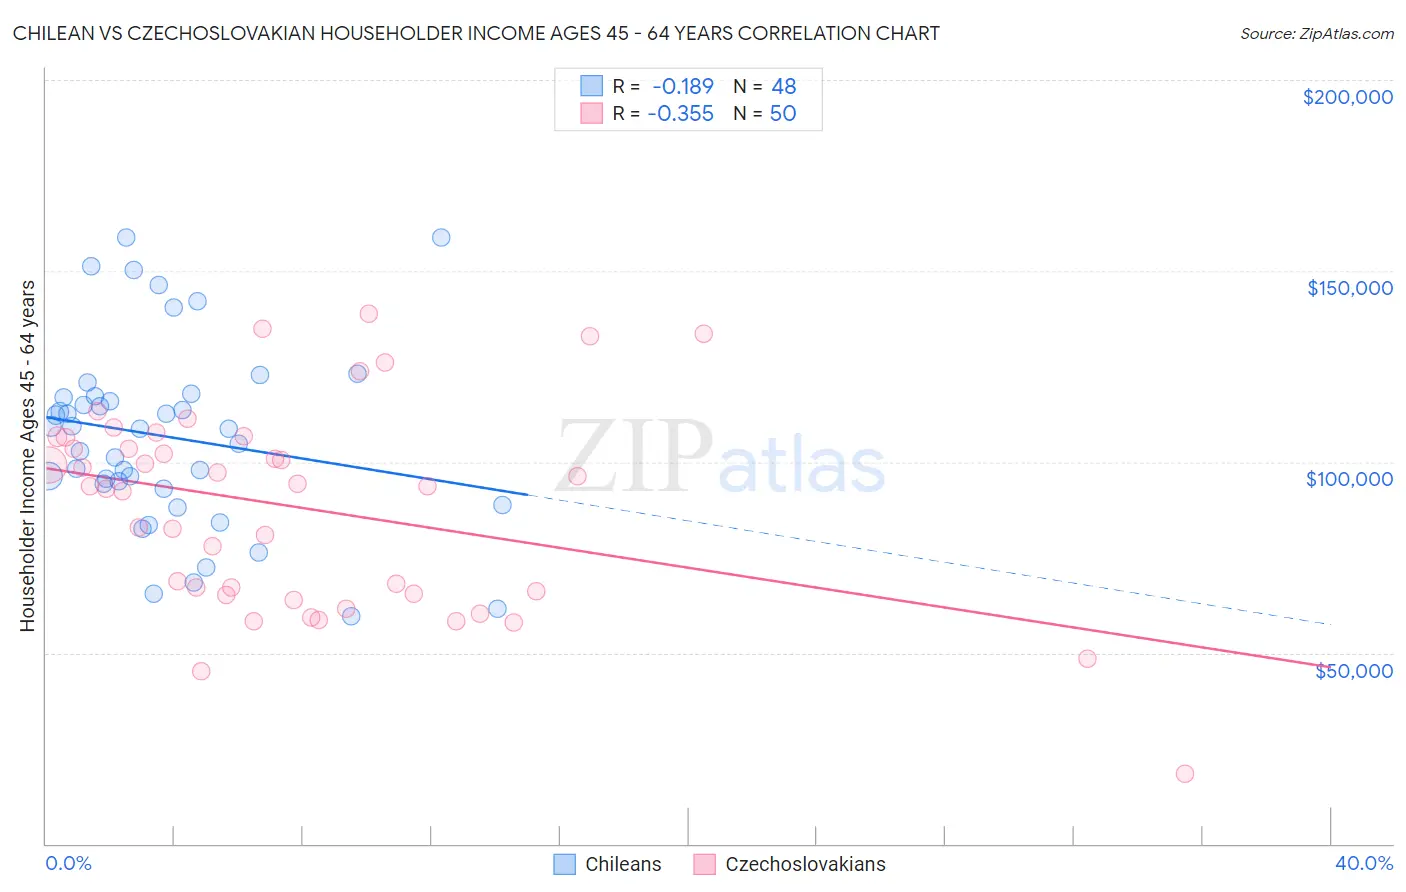 Chilean vs Czechoslovakian Householder Income Ages 45 - 64 years